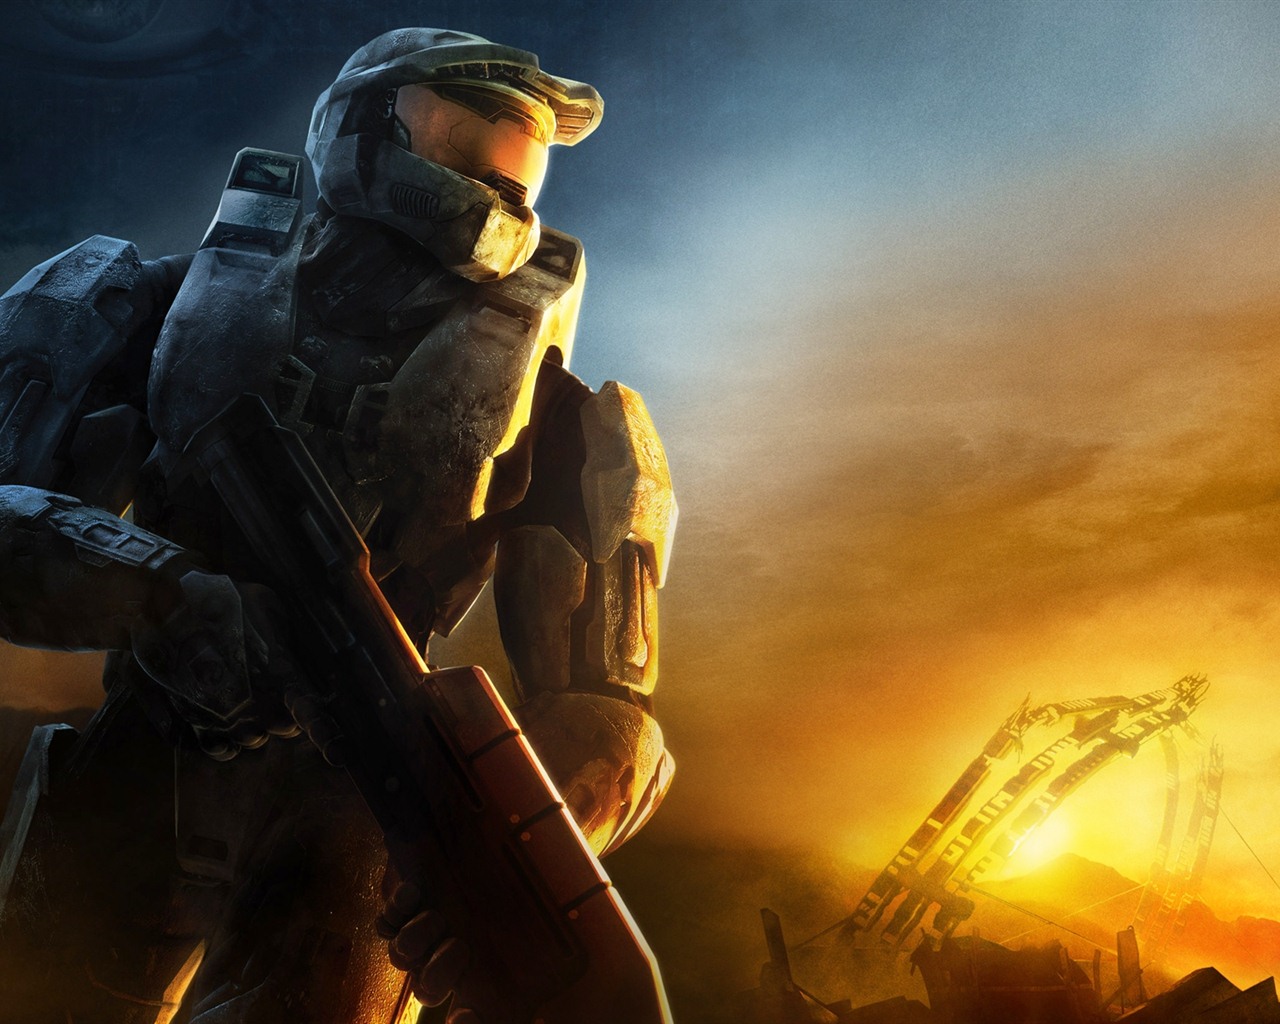 Halo game HD wallpapers #22 - 1280x1024